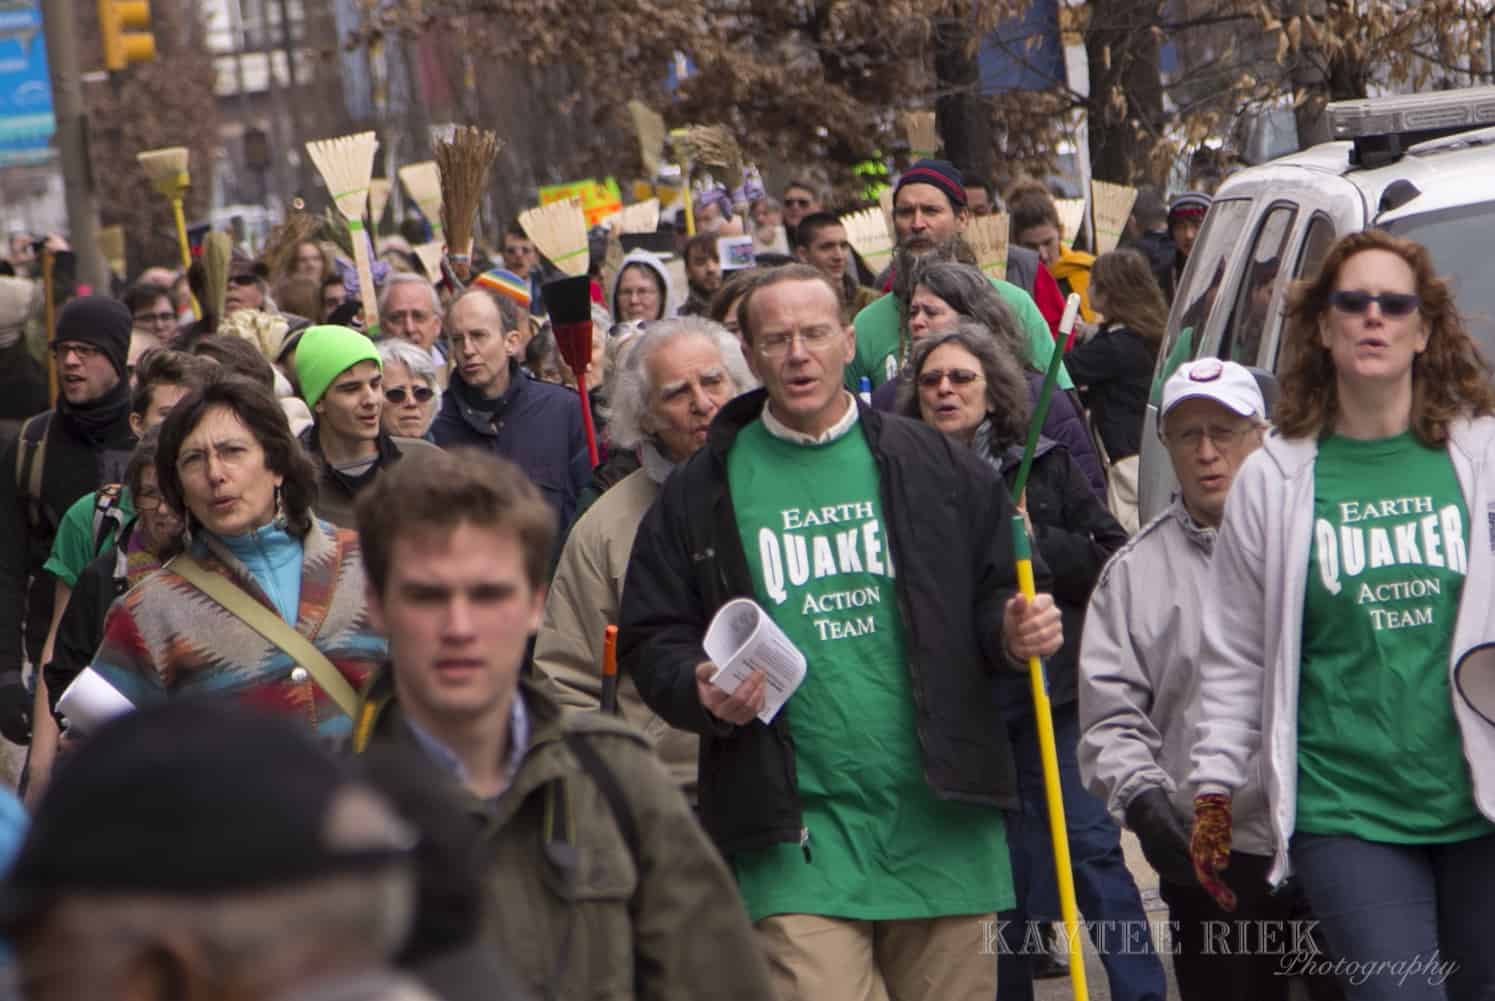 A large crowd of people are marching towards to camera. Many are holding brooms. One person front and center is wearing a green shirt with white text that says "Earth Quaker Action Team."